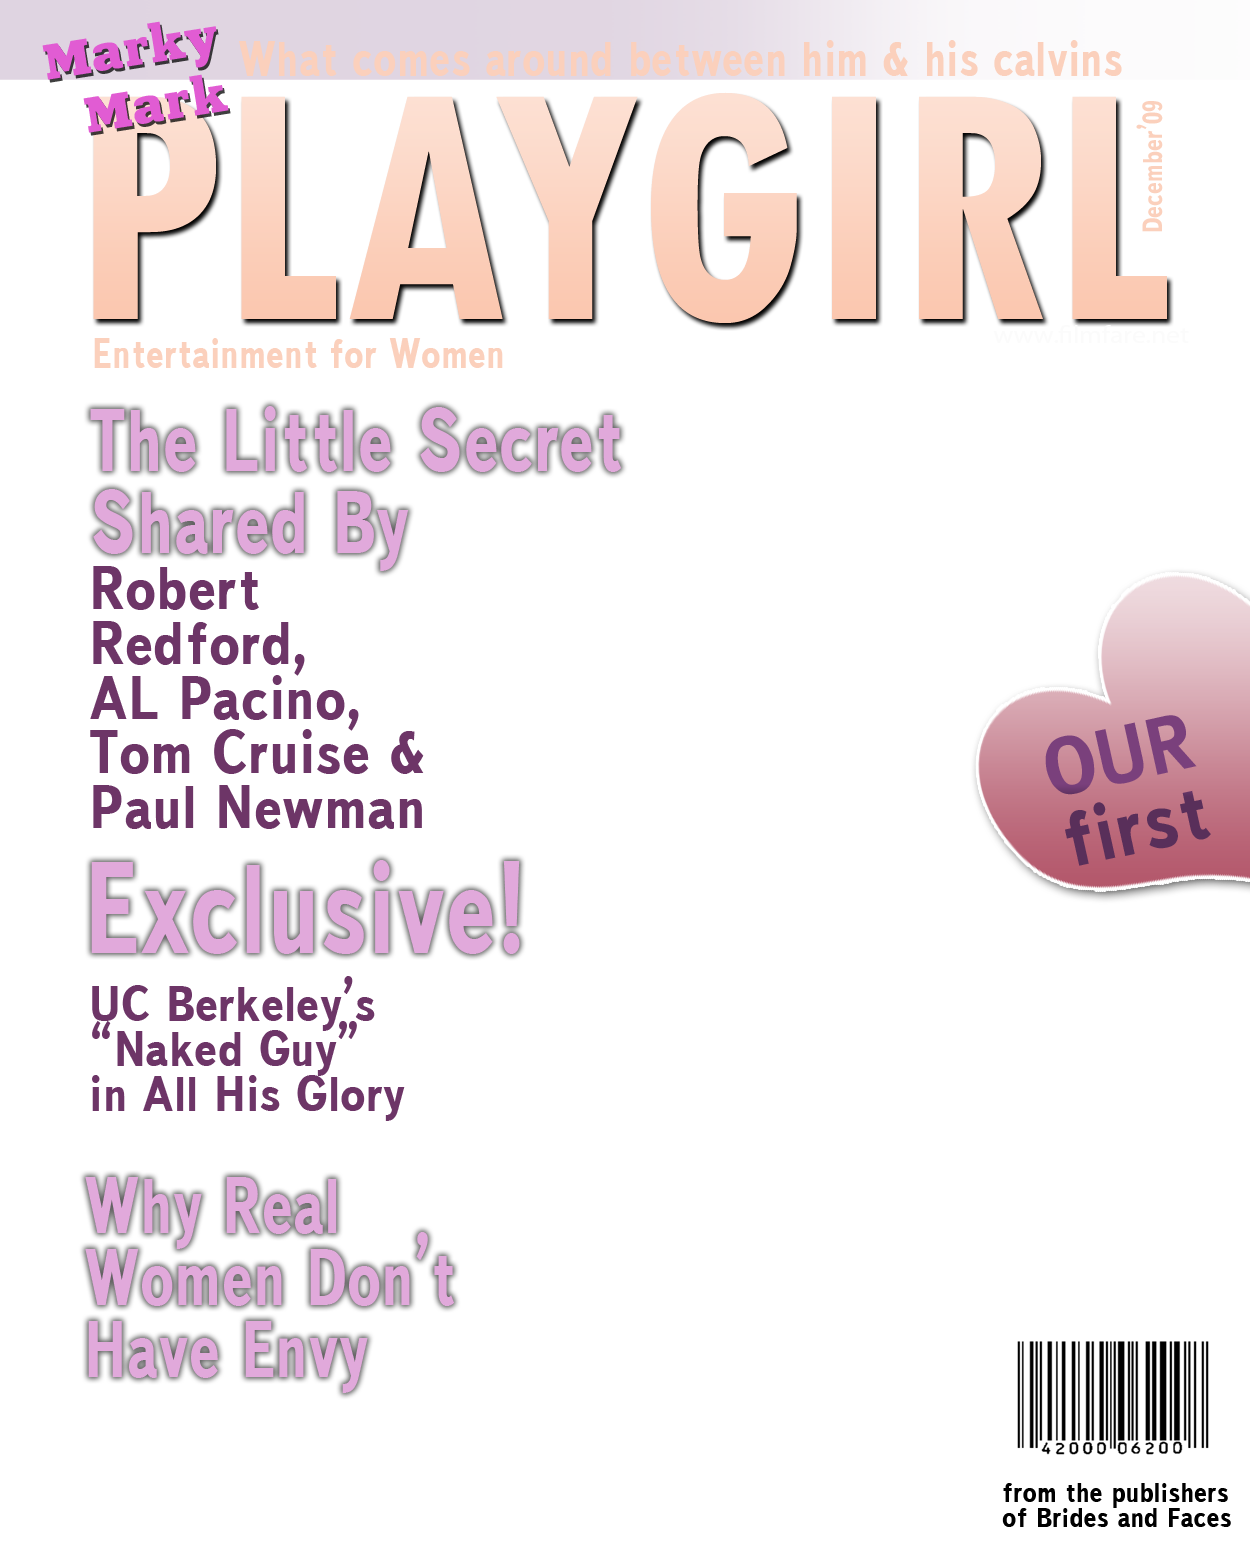 playboy-magazine-cover-template-png